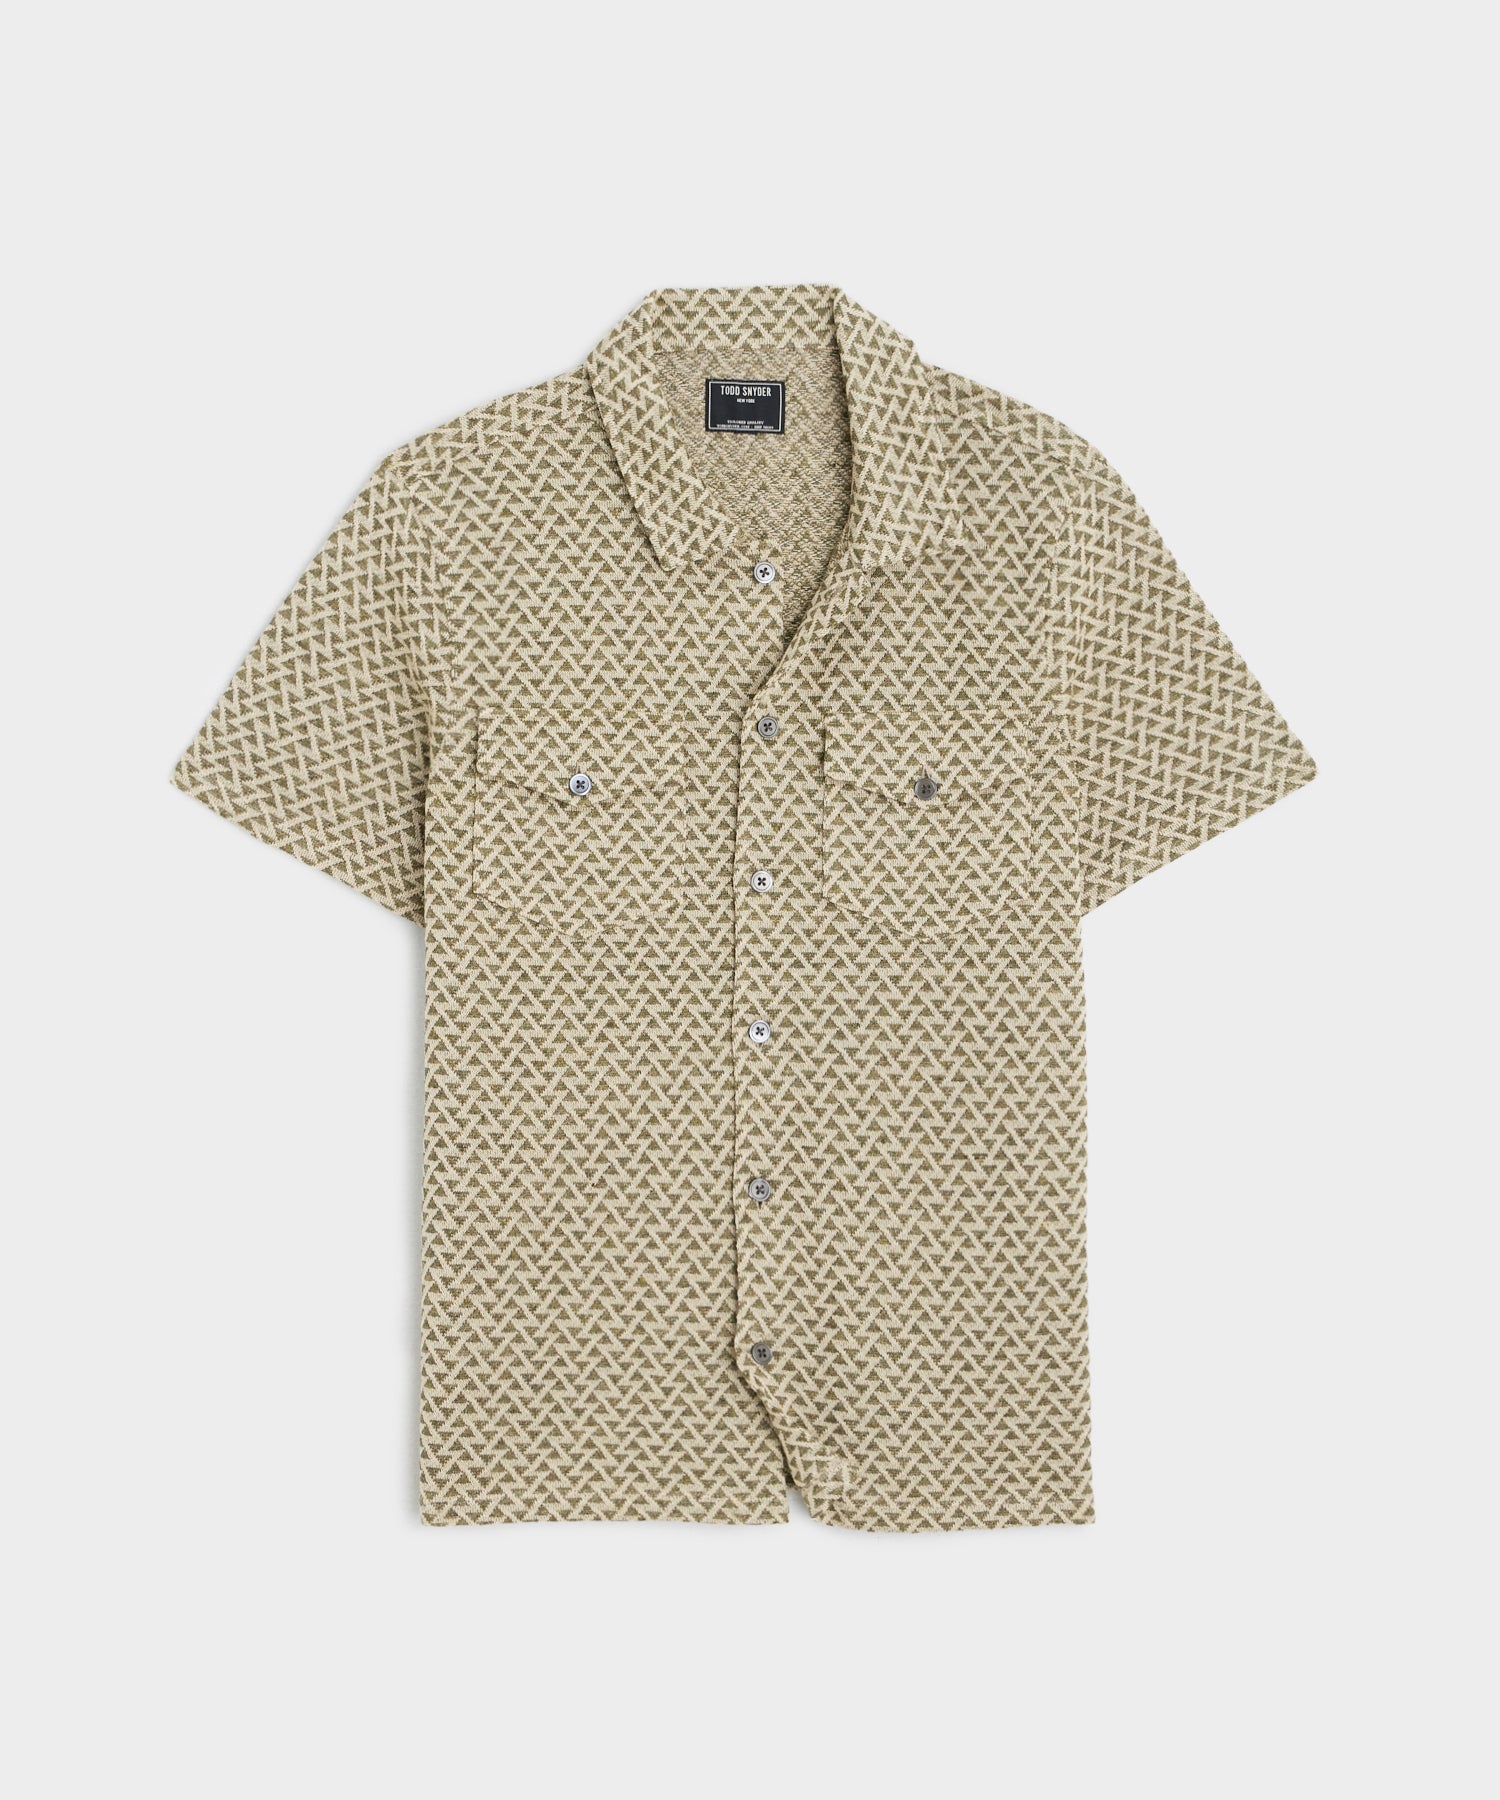 Knit Jacquard POLO Shirt in Faded Surplus